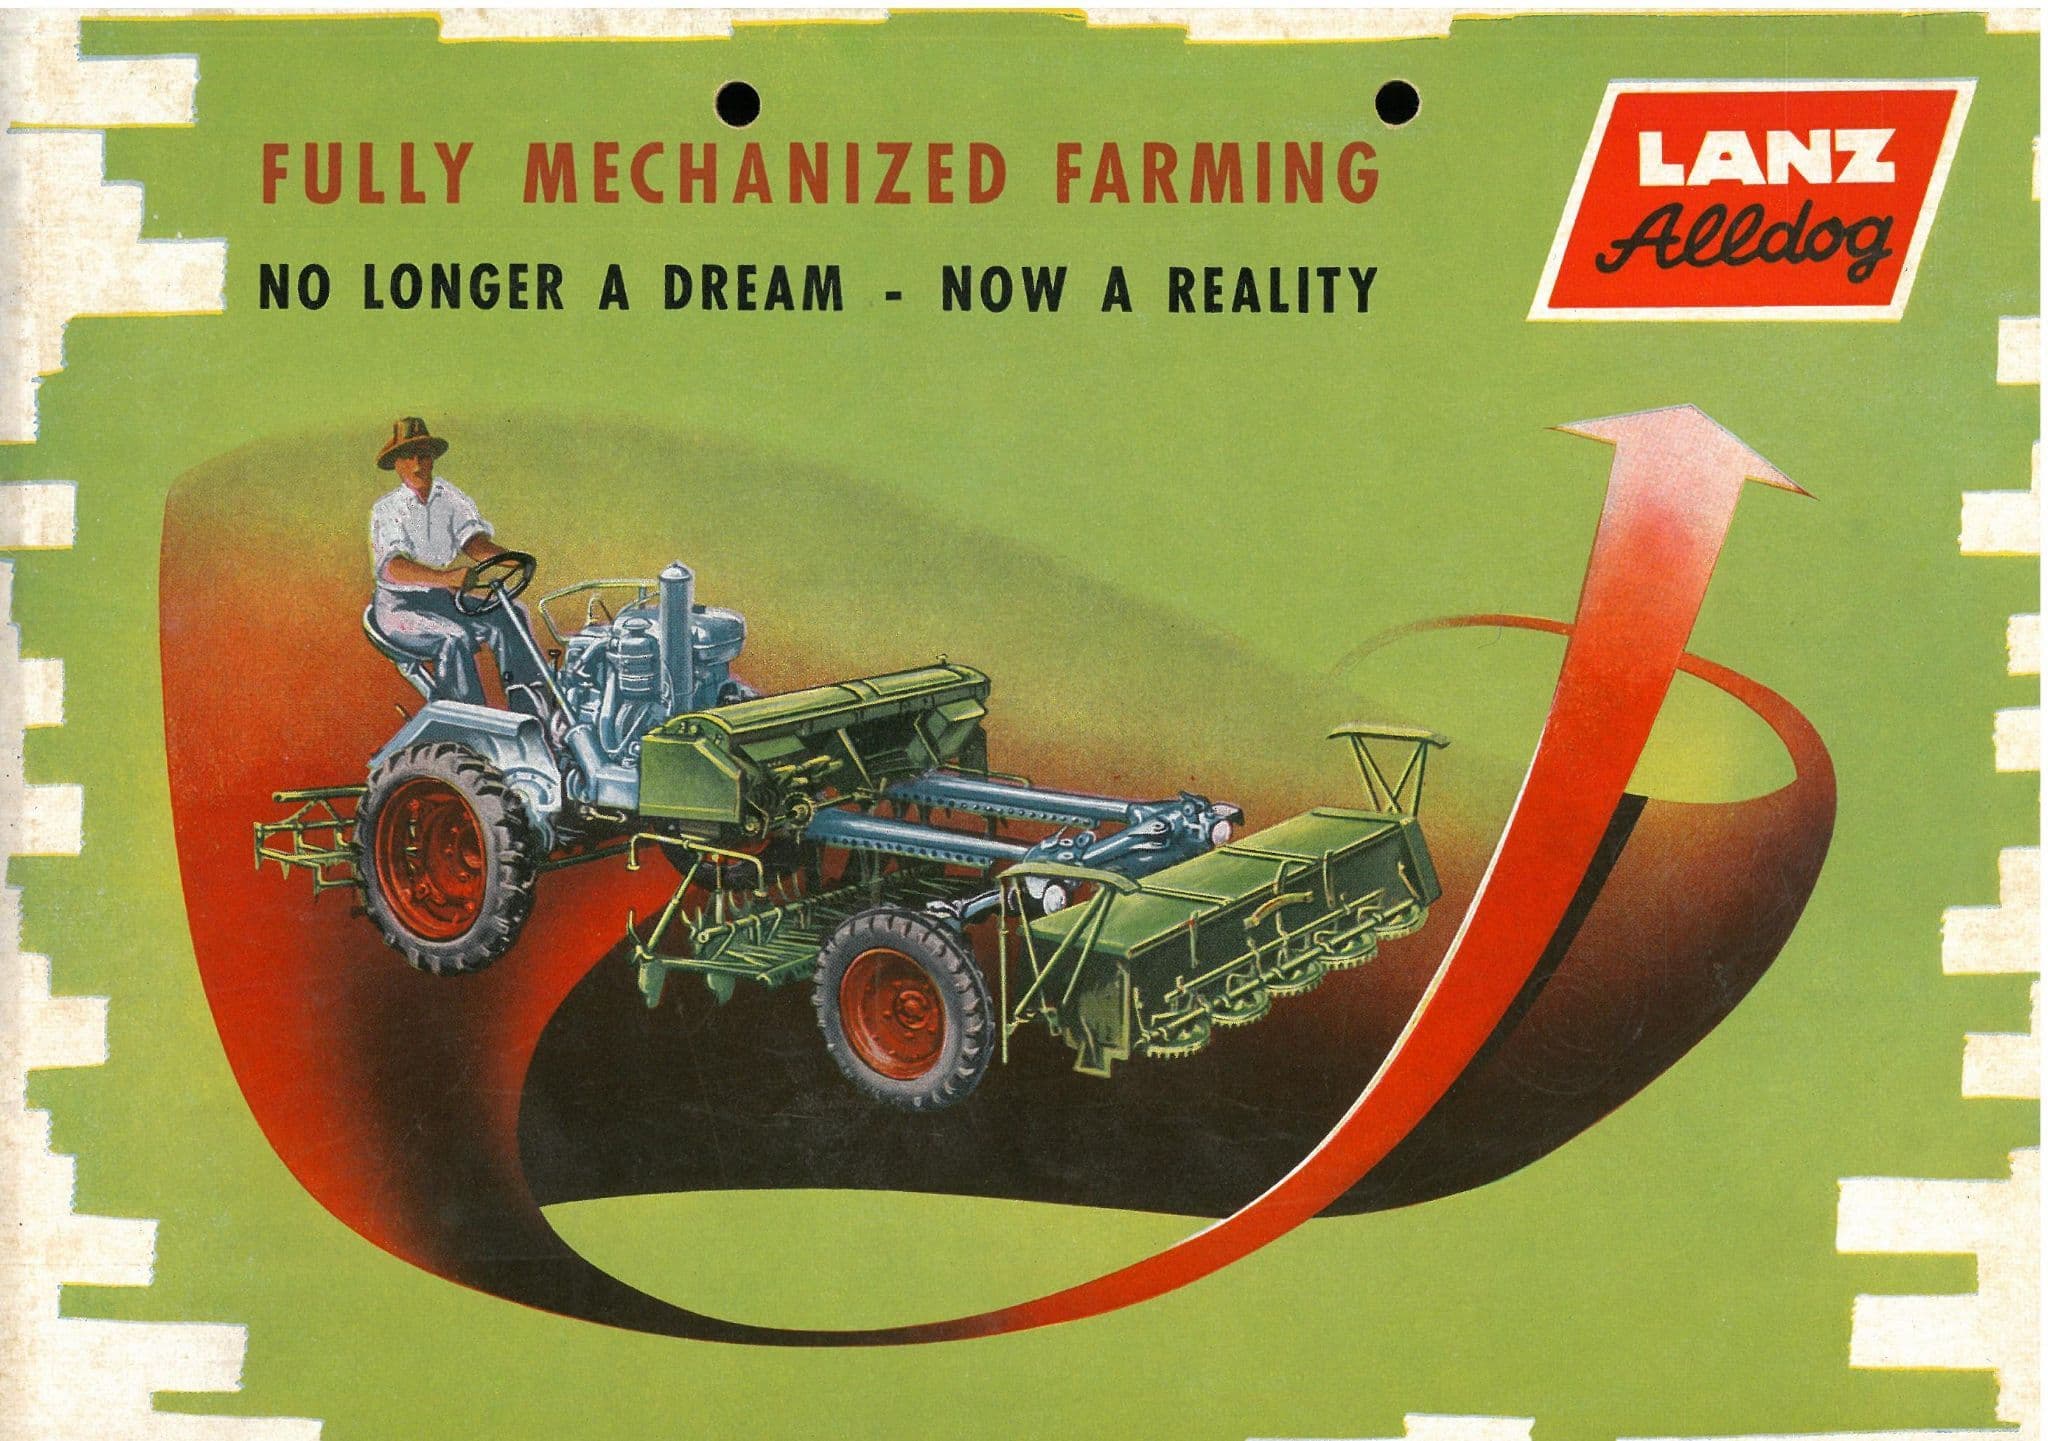 lanz-alldog-tractor-brochure-also-shows-34-of-the-90-possible-implements-39351-1-p.jpg